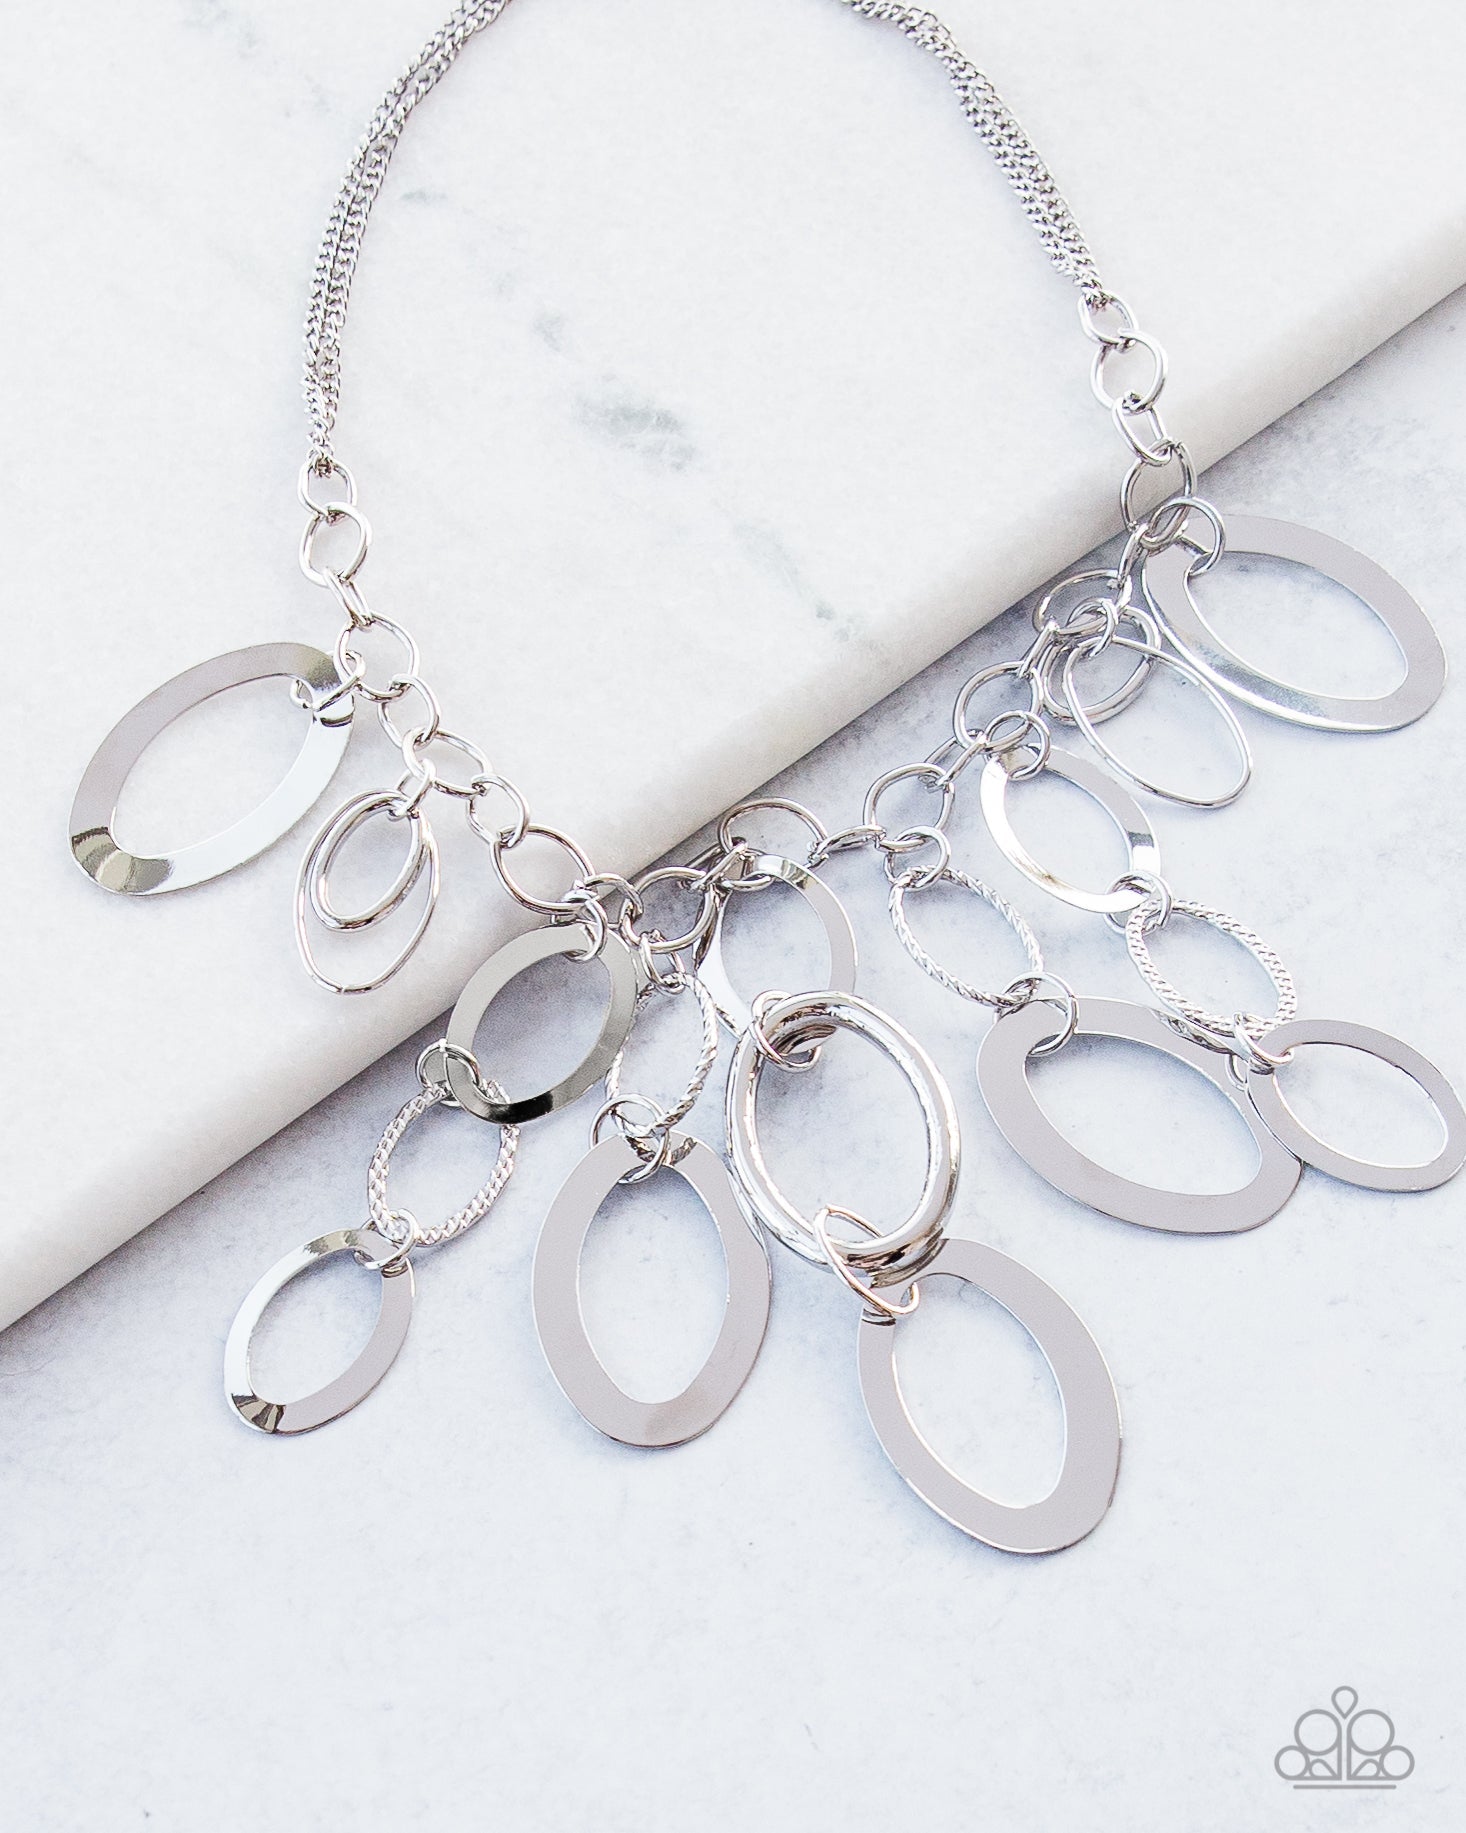 A Silver Spell - Silver Necklace - Paparazzi Jewelry - Bejeweled Accessories By Kristie - Large silver links and shimmering textured silver rings cascade below a silver chain freely, allowing for movement that makes a bold statement.